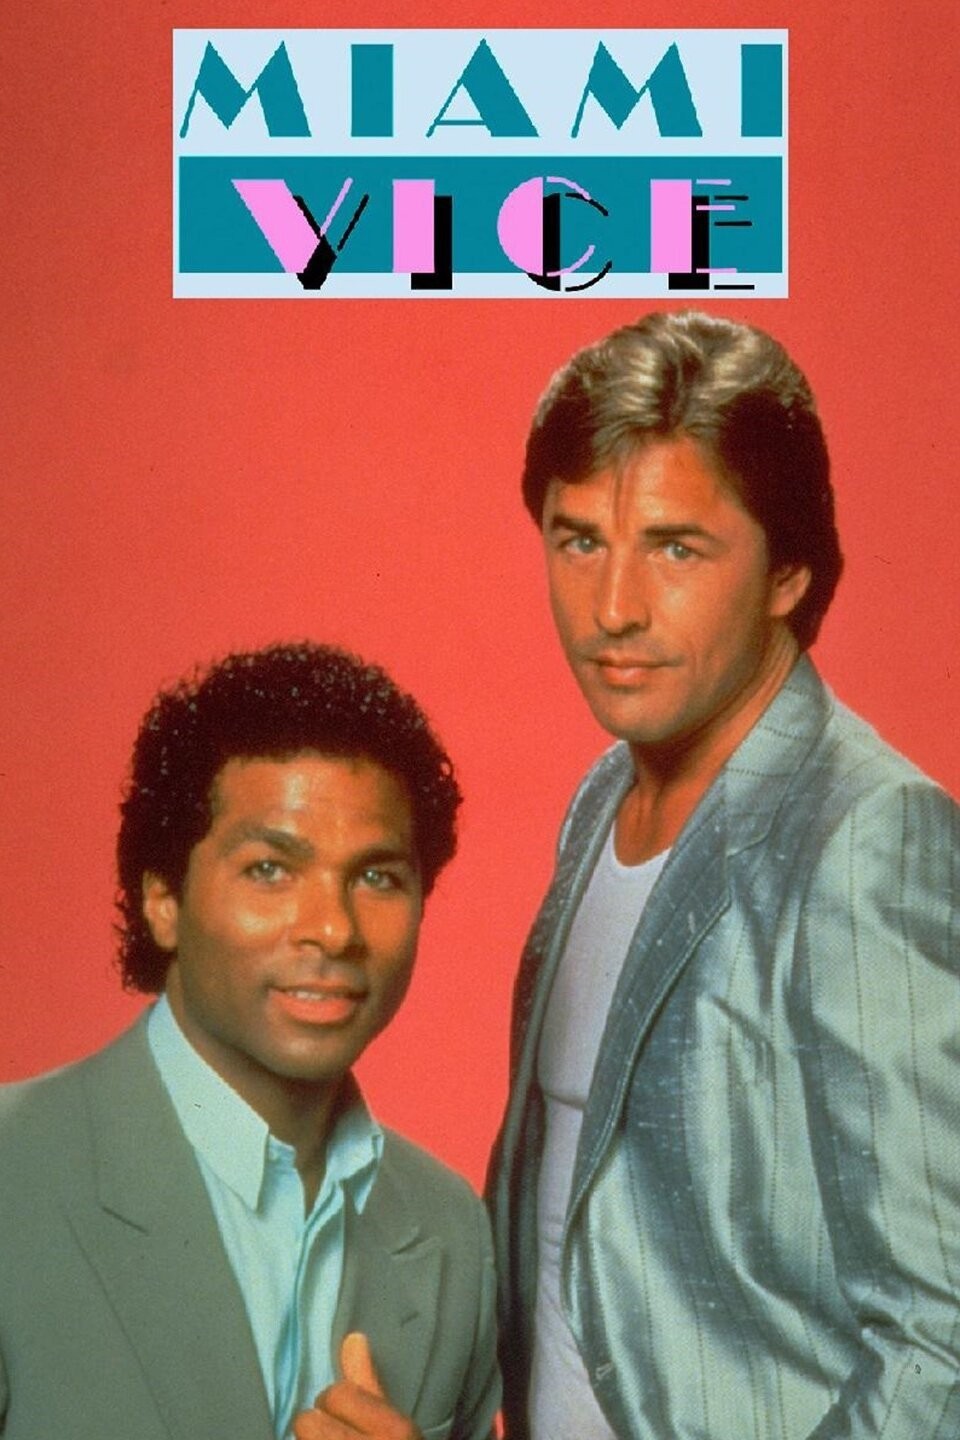 Miami Vice - watch tv show streaming online